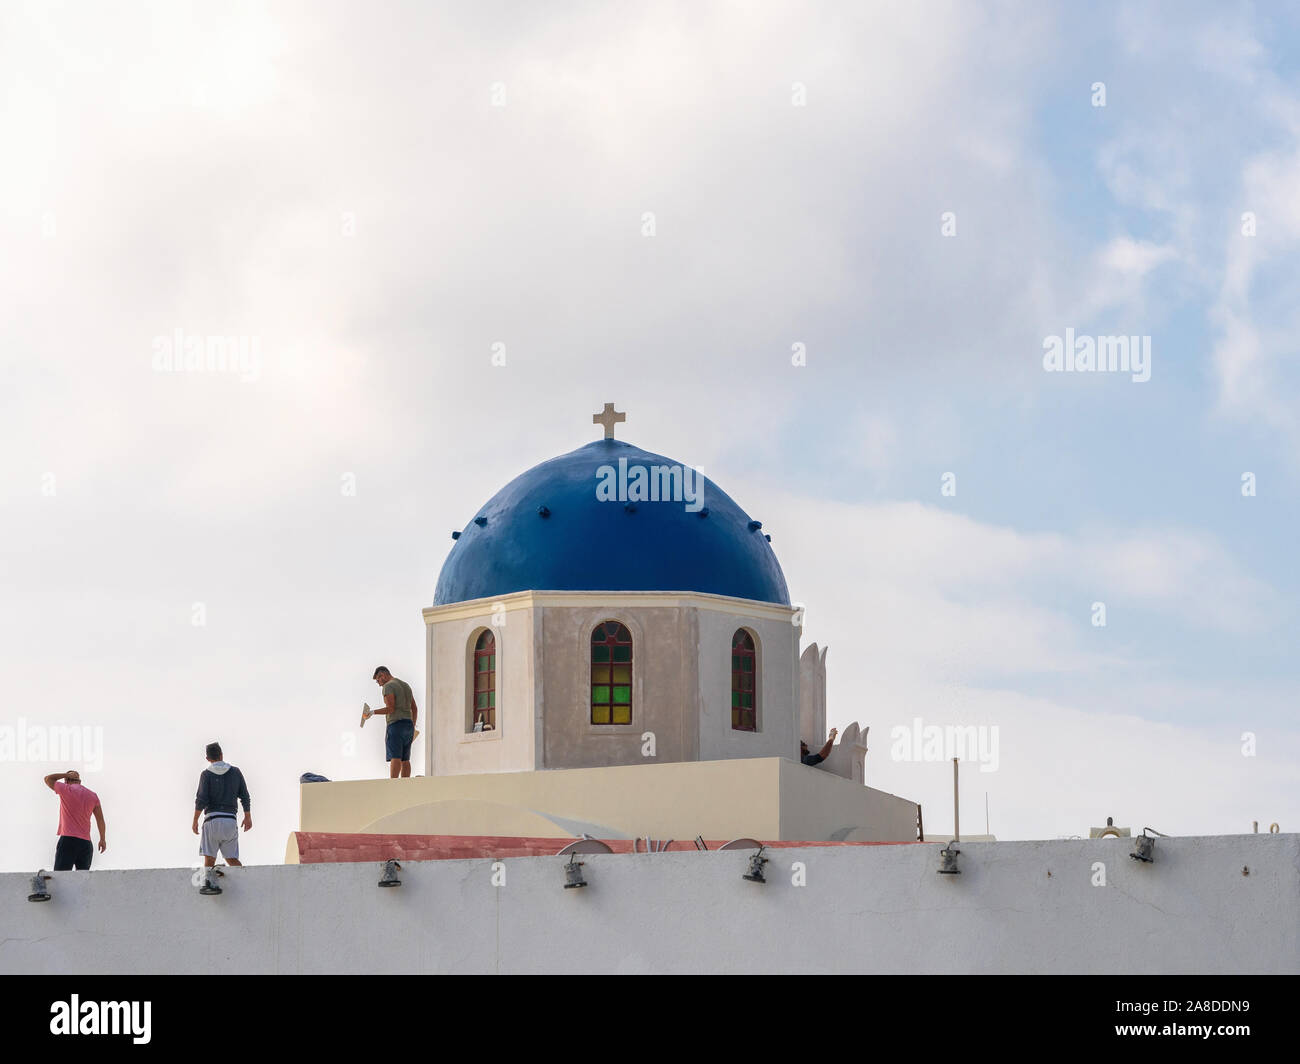 1st Nov 2019 - Santorini, Greece. A worker applies plaster on the traditional Santorini church with a blue dome. Stock Photo